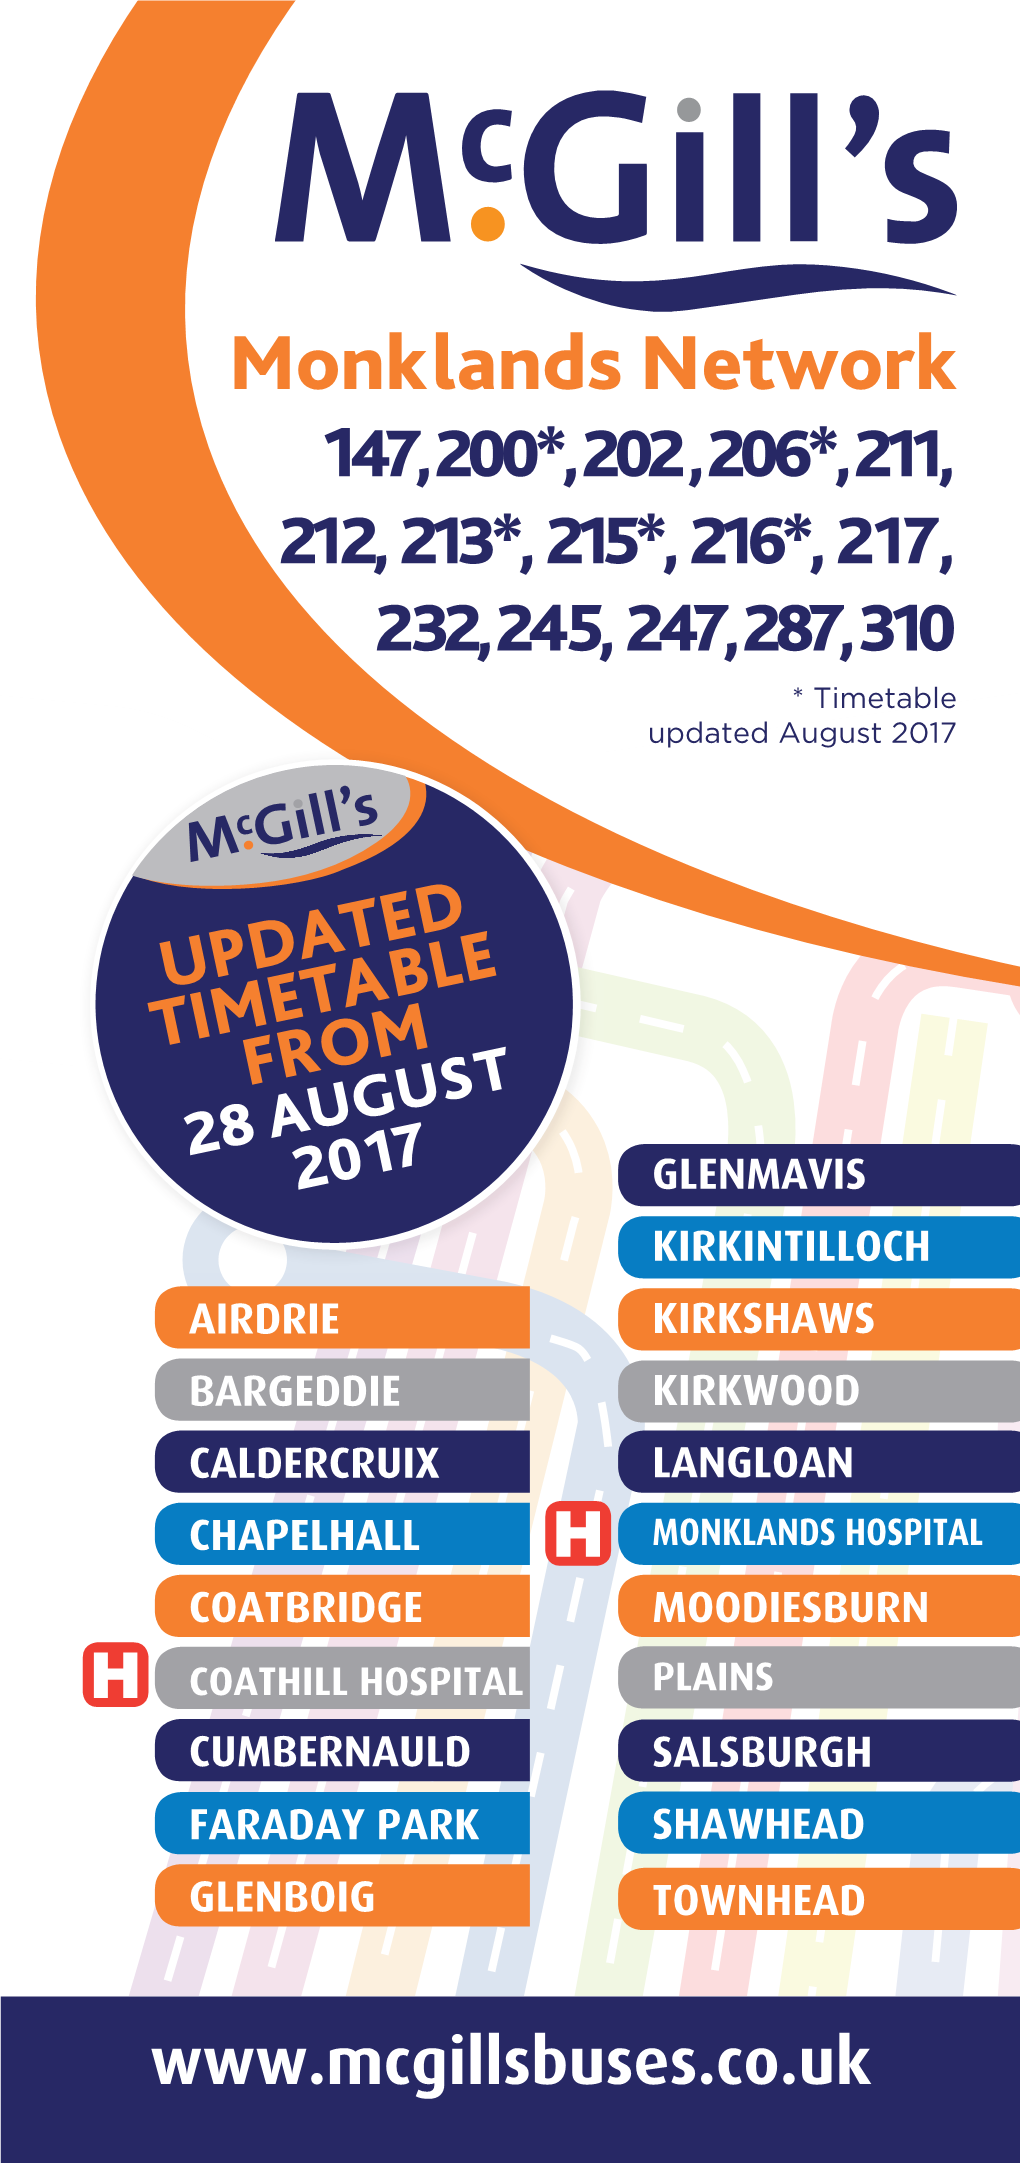 Monklands Network 147, 200*, 202 , 206*, 211, 212, 213*, 215*, 216*, 217, 232, 245, 247, 287, 310 * Timetable Updated August 2017